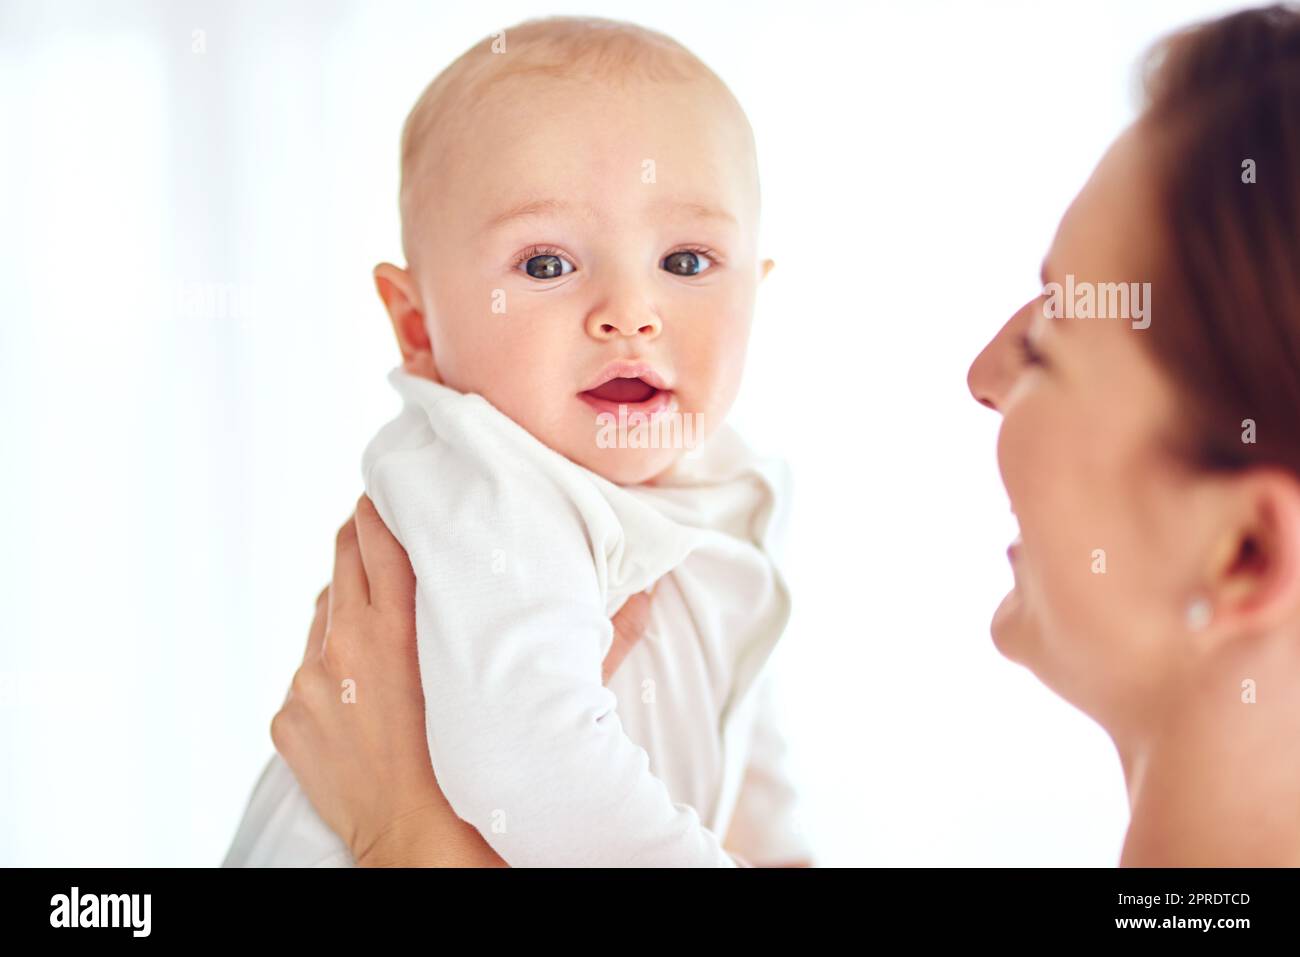 Cute and innocent newborn baby boy bonding with his mom together as a family in studio isolated on a white background. Newborn male child in the hands of his single mother or parent with copyspace Stock Photo